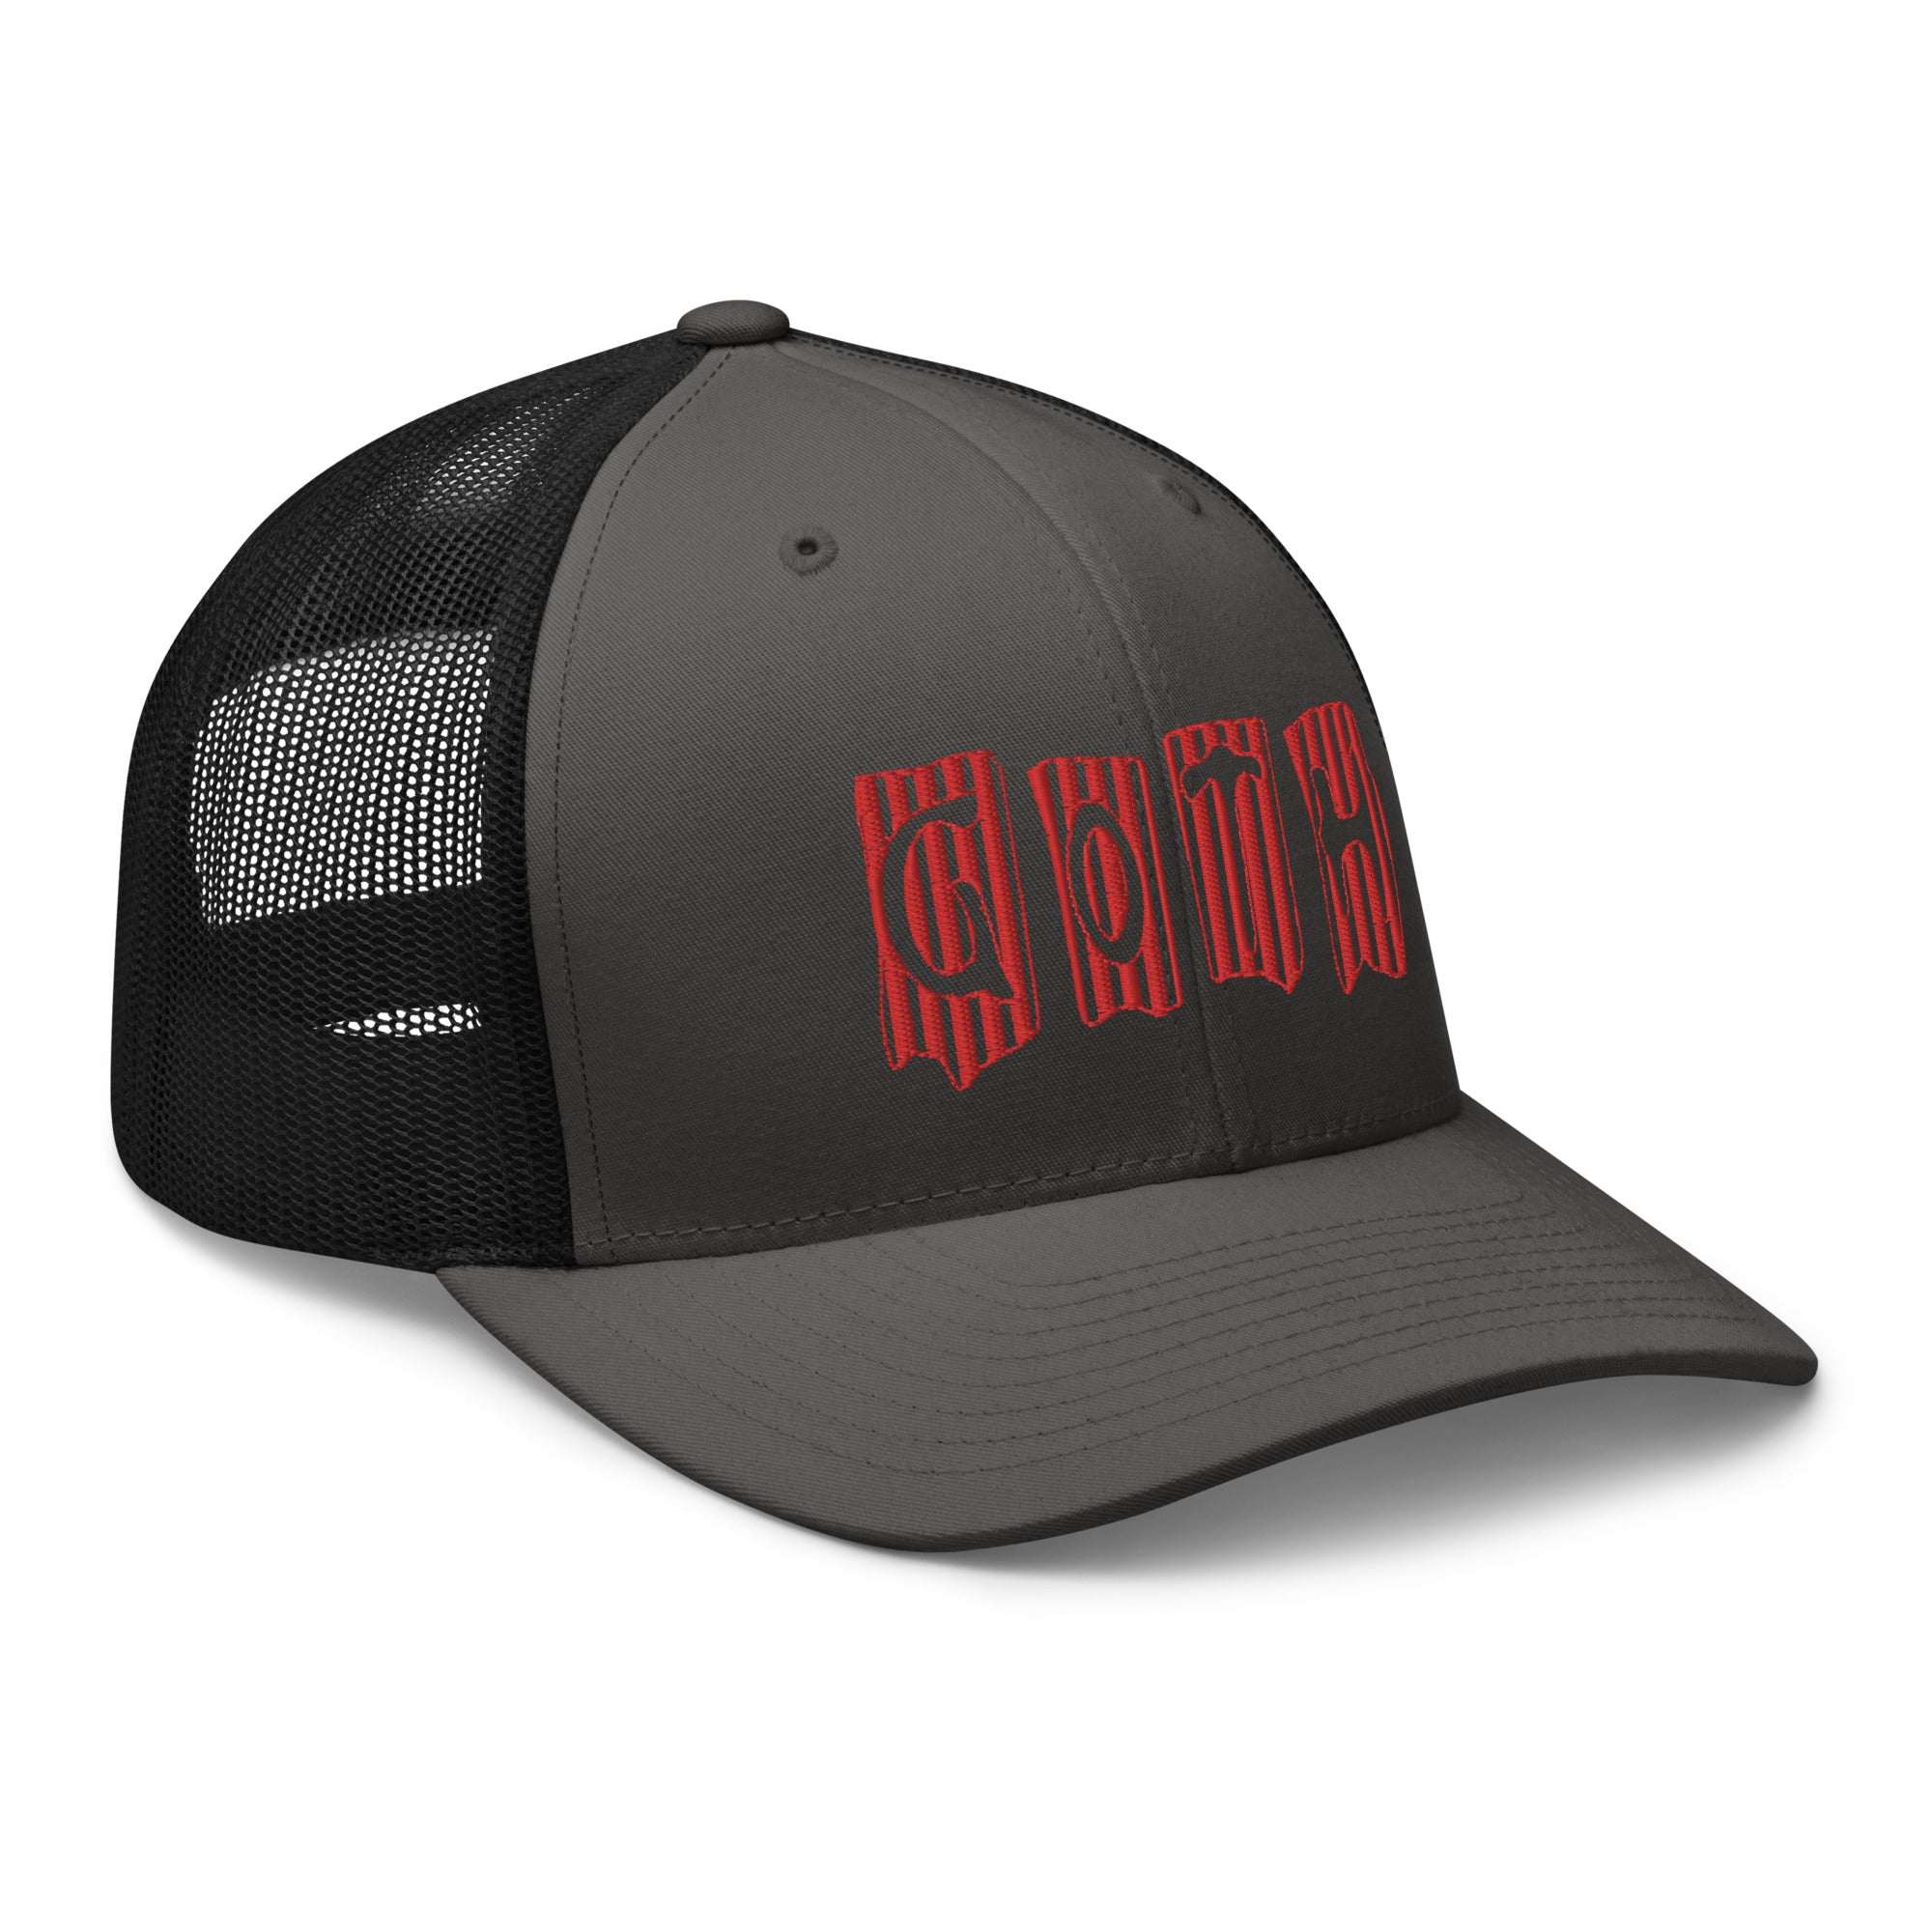 Red Vertical Stripe Goth Embroidered Trucker Cap Snapback Hat